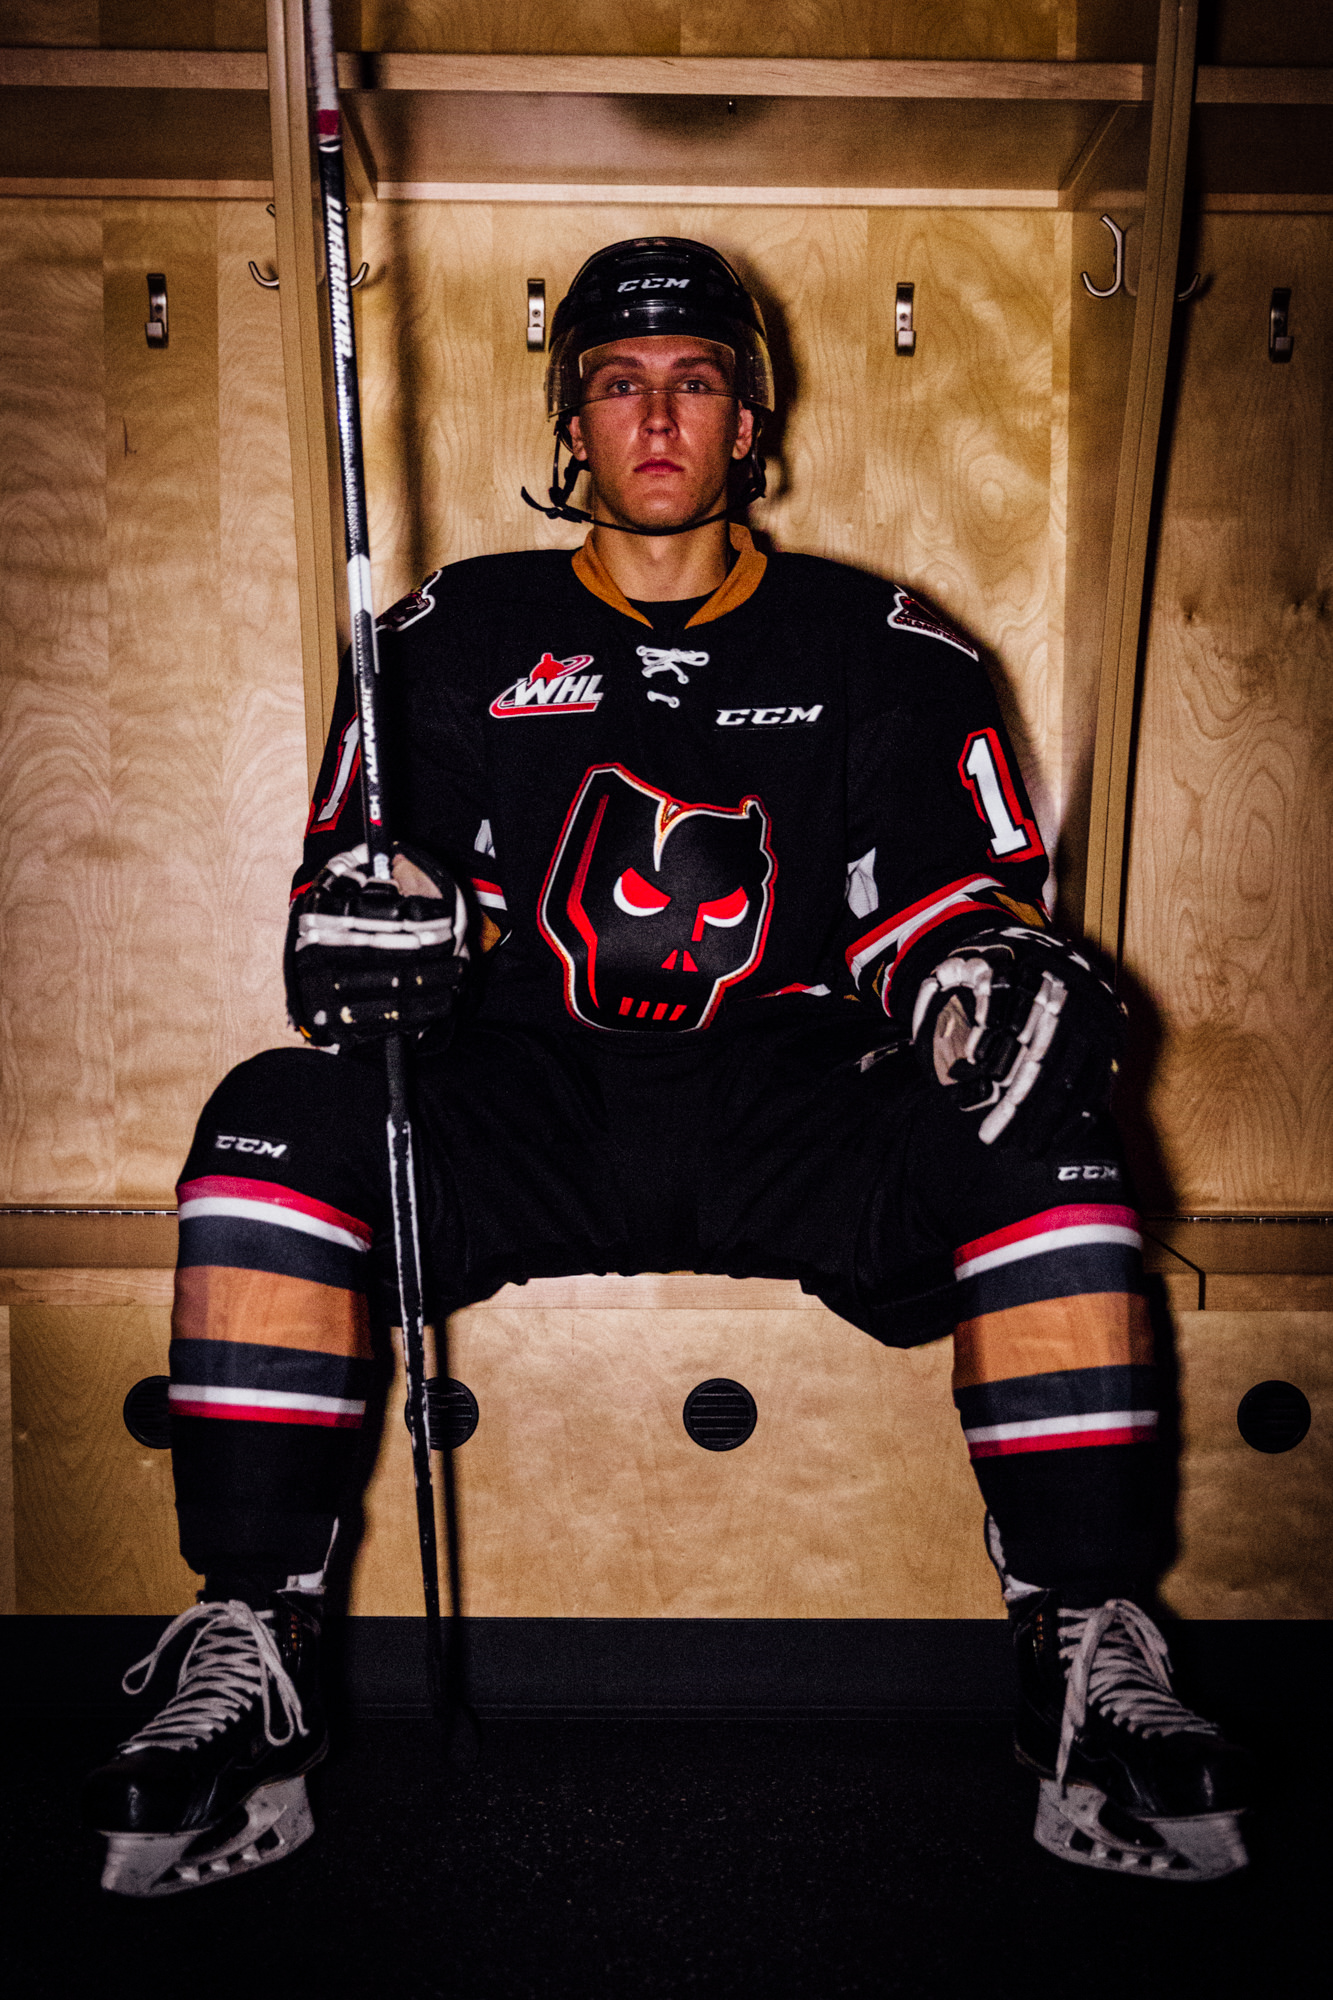 Calgary Hitmen unveil incredible Every Child Matters jersey (PHOTOS)